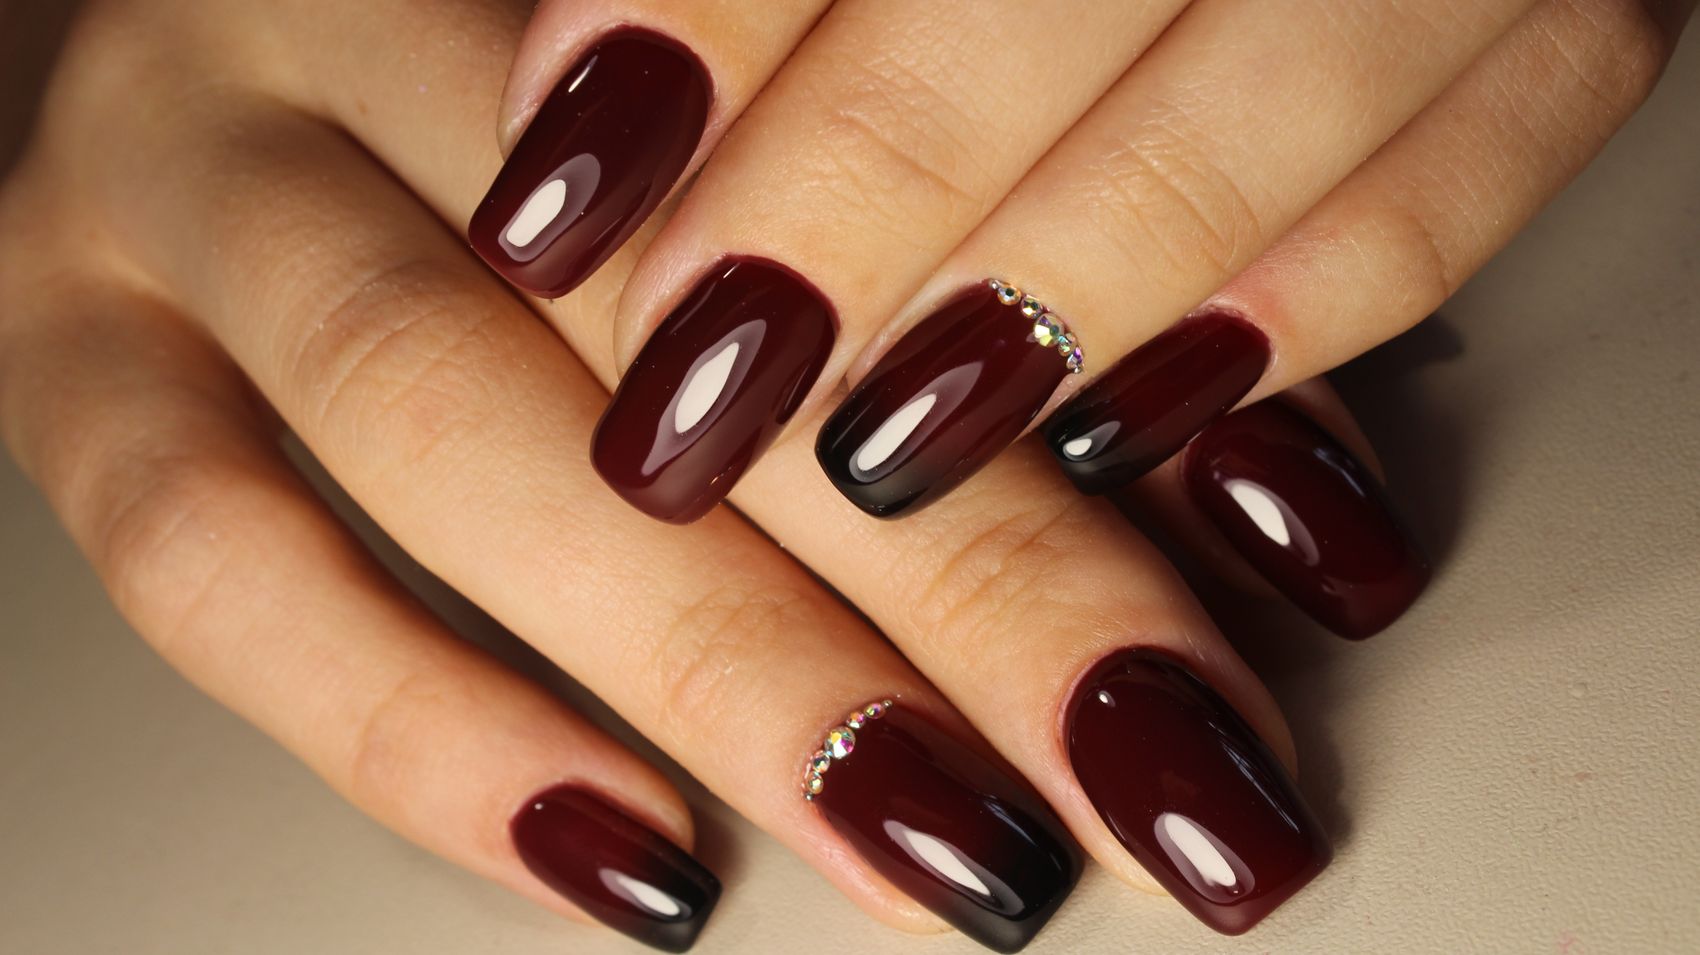 10. "The Most Popular Nail Color Combos of the Year" - wide 2